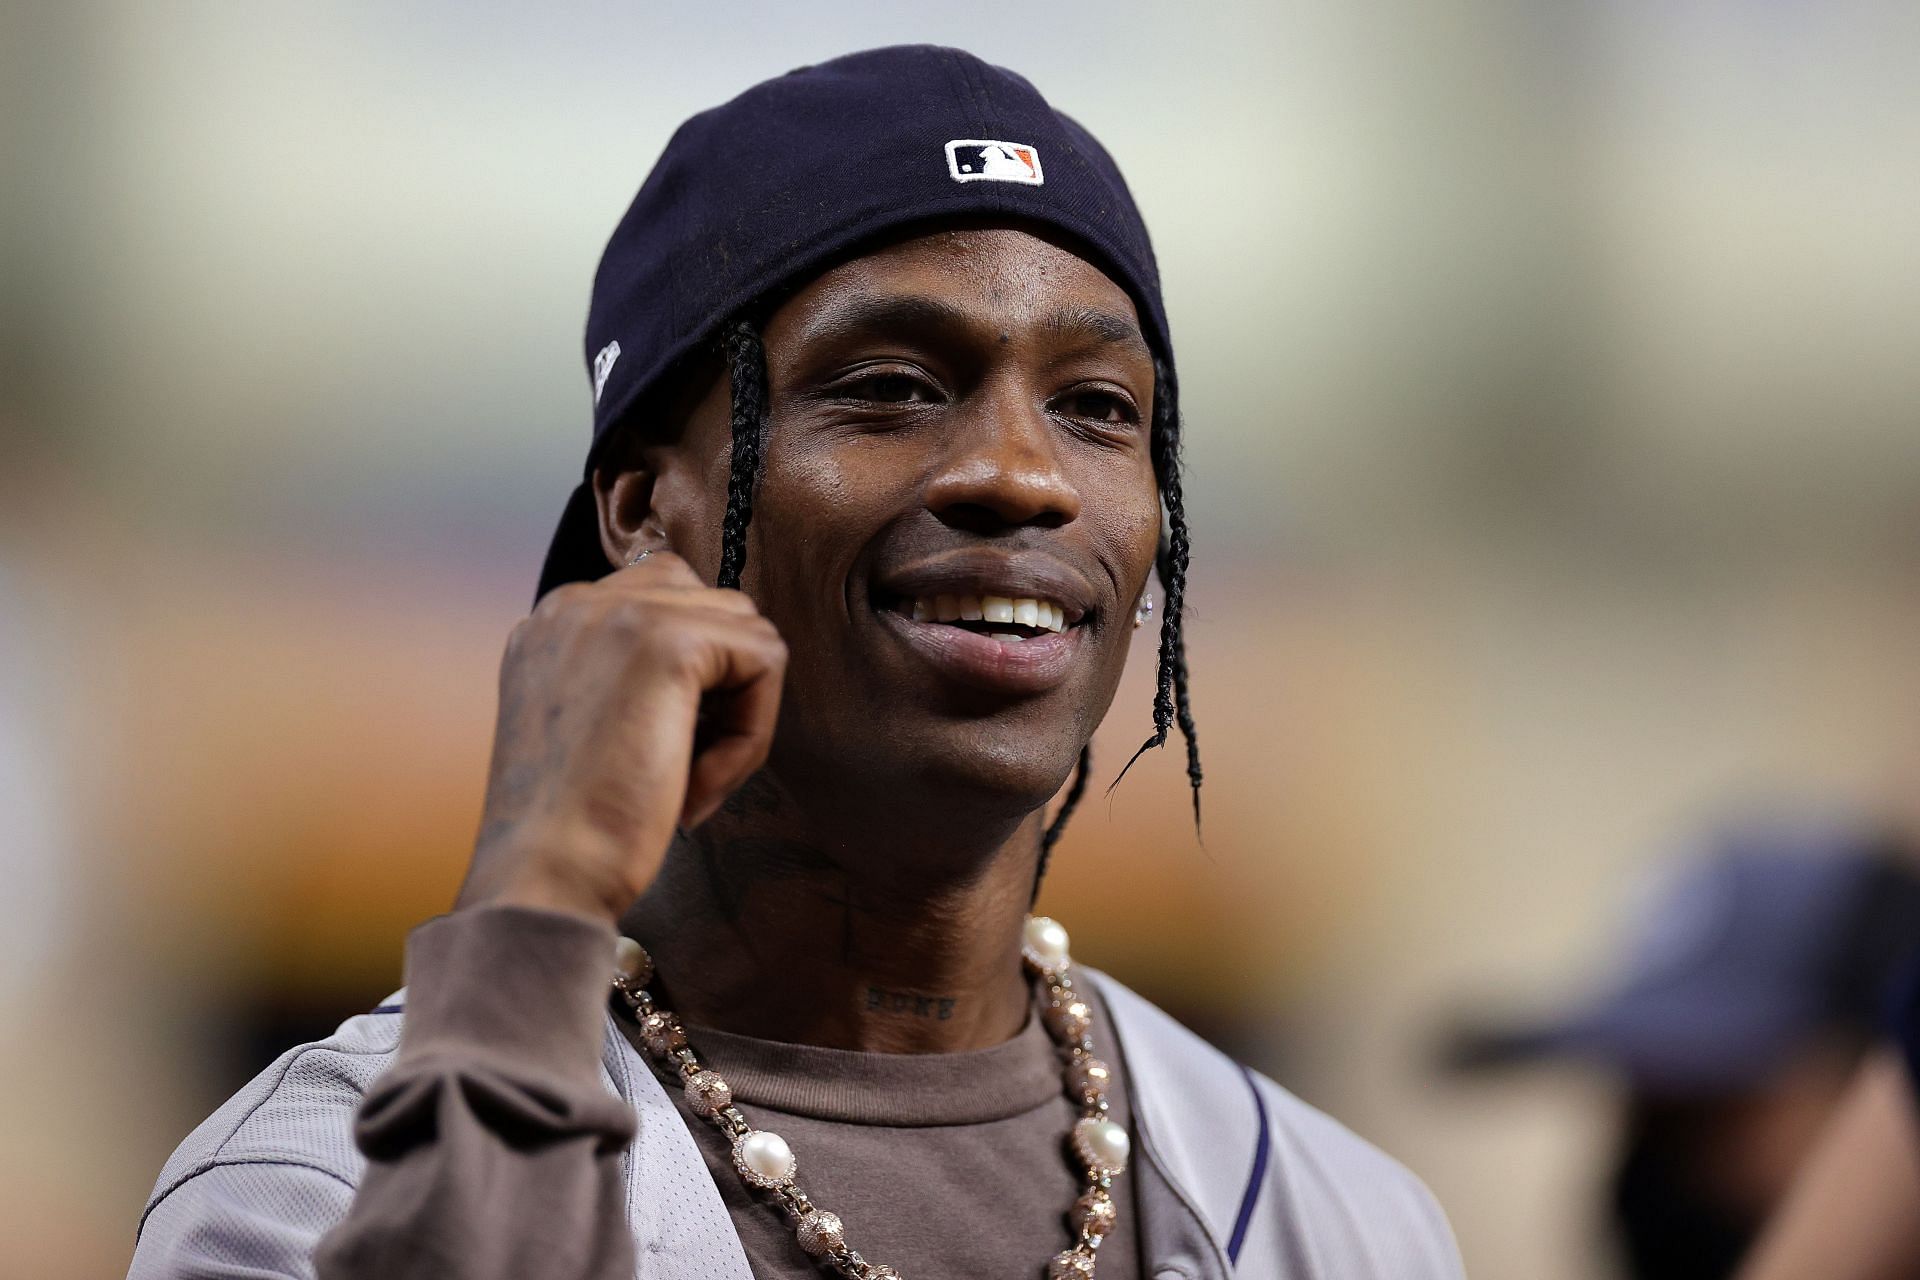 Travis Scott attends Astros game, previews new album for players